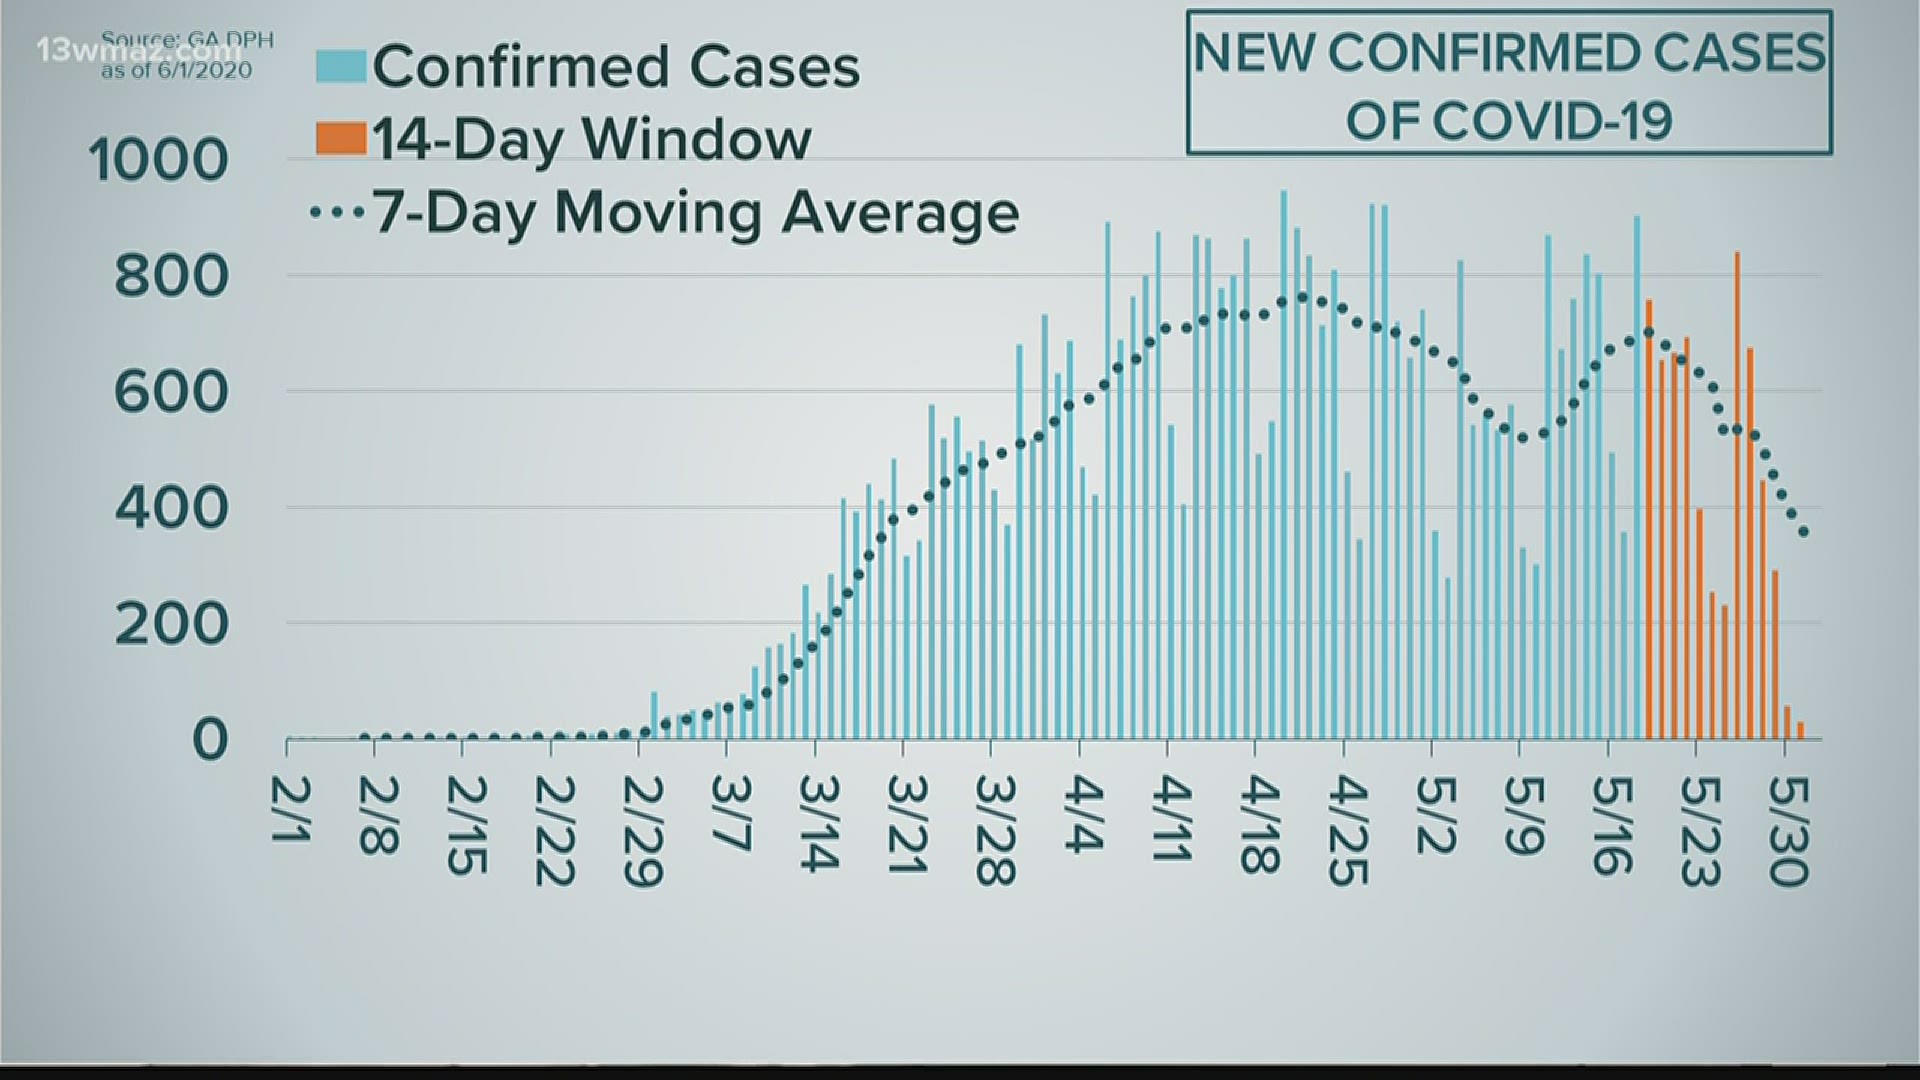 Georgia's COVID-19 curve, as of Monday afternoon, shows the number of new confirmed cases every day in our state going back months.